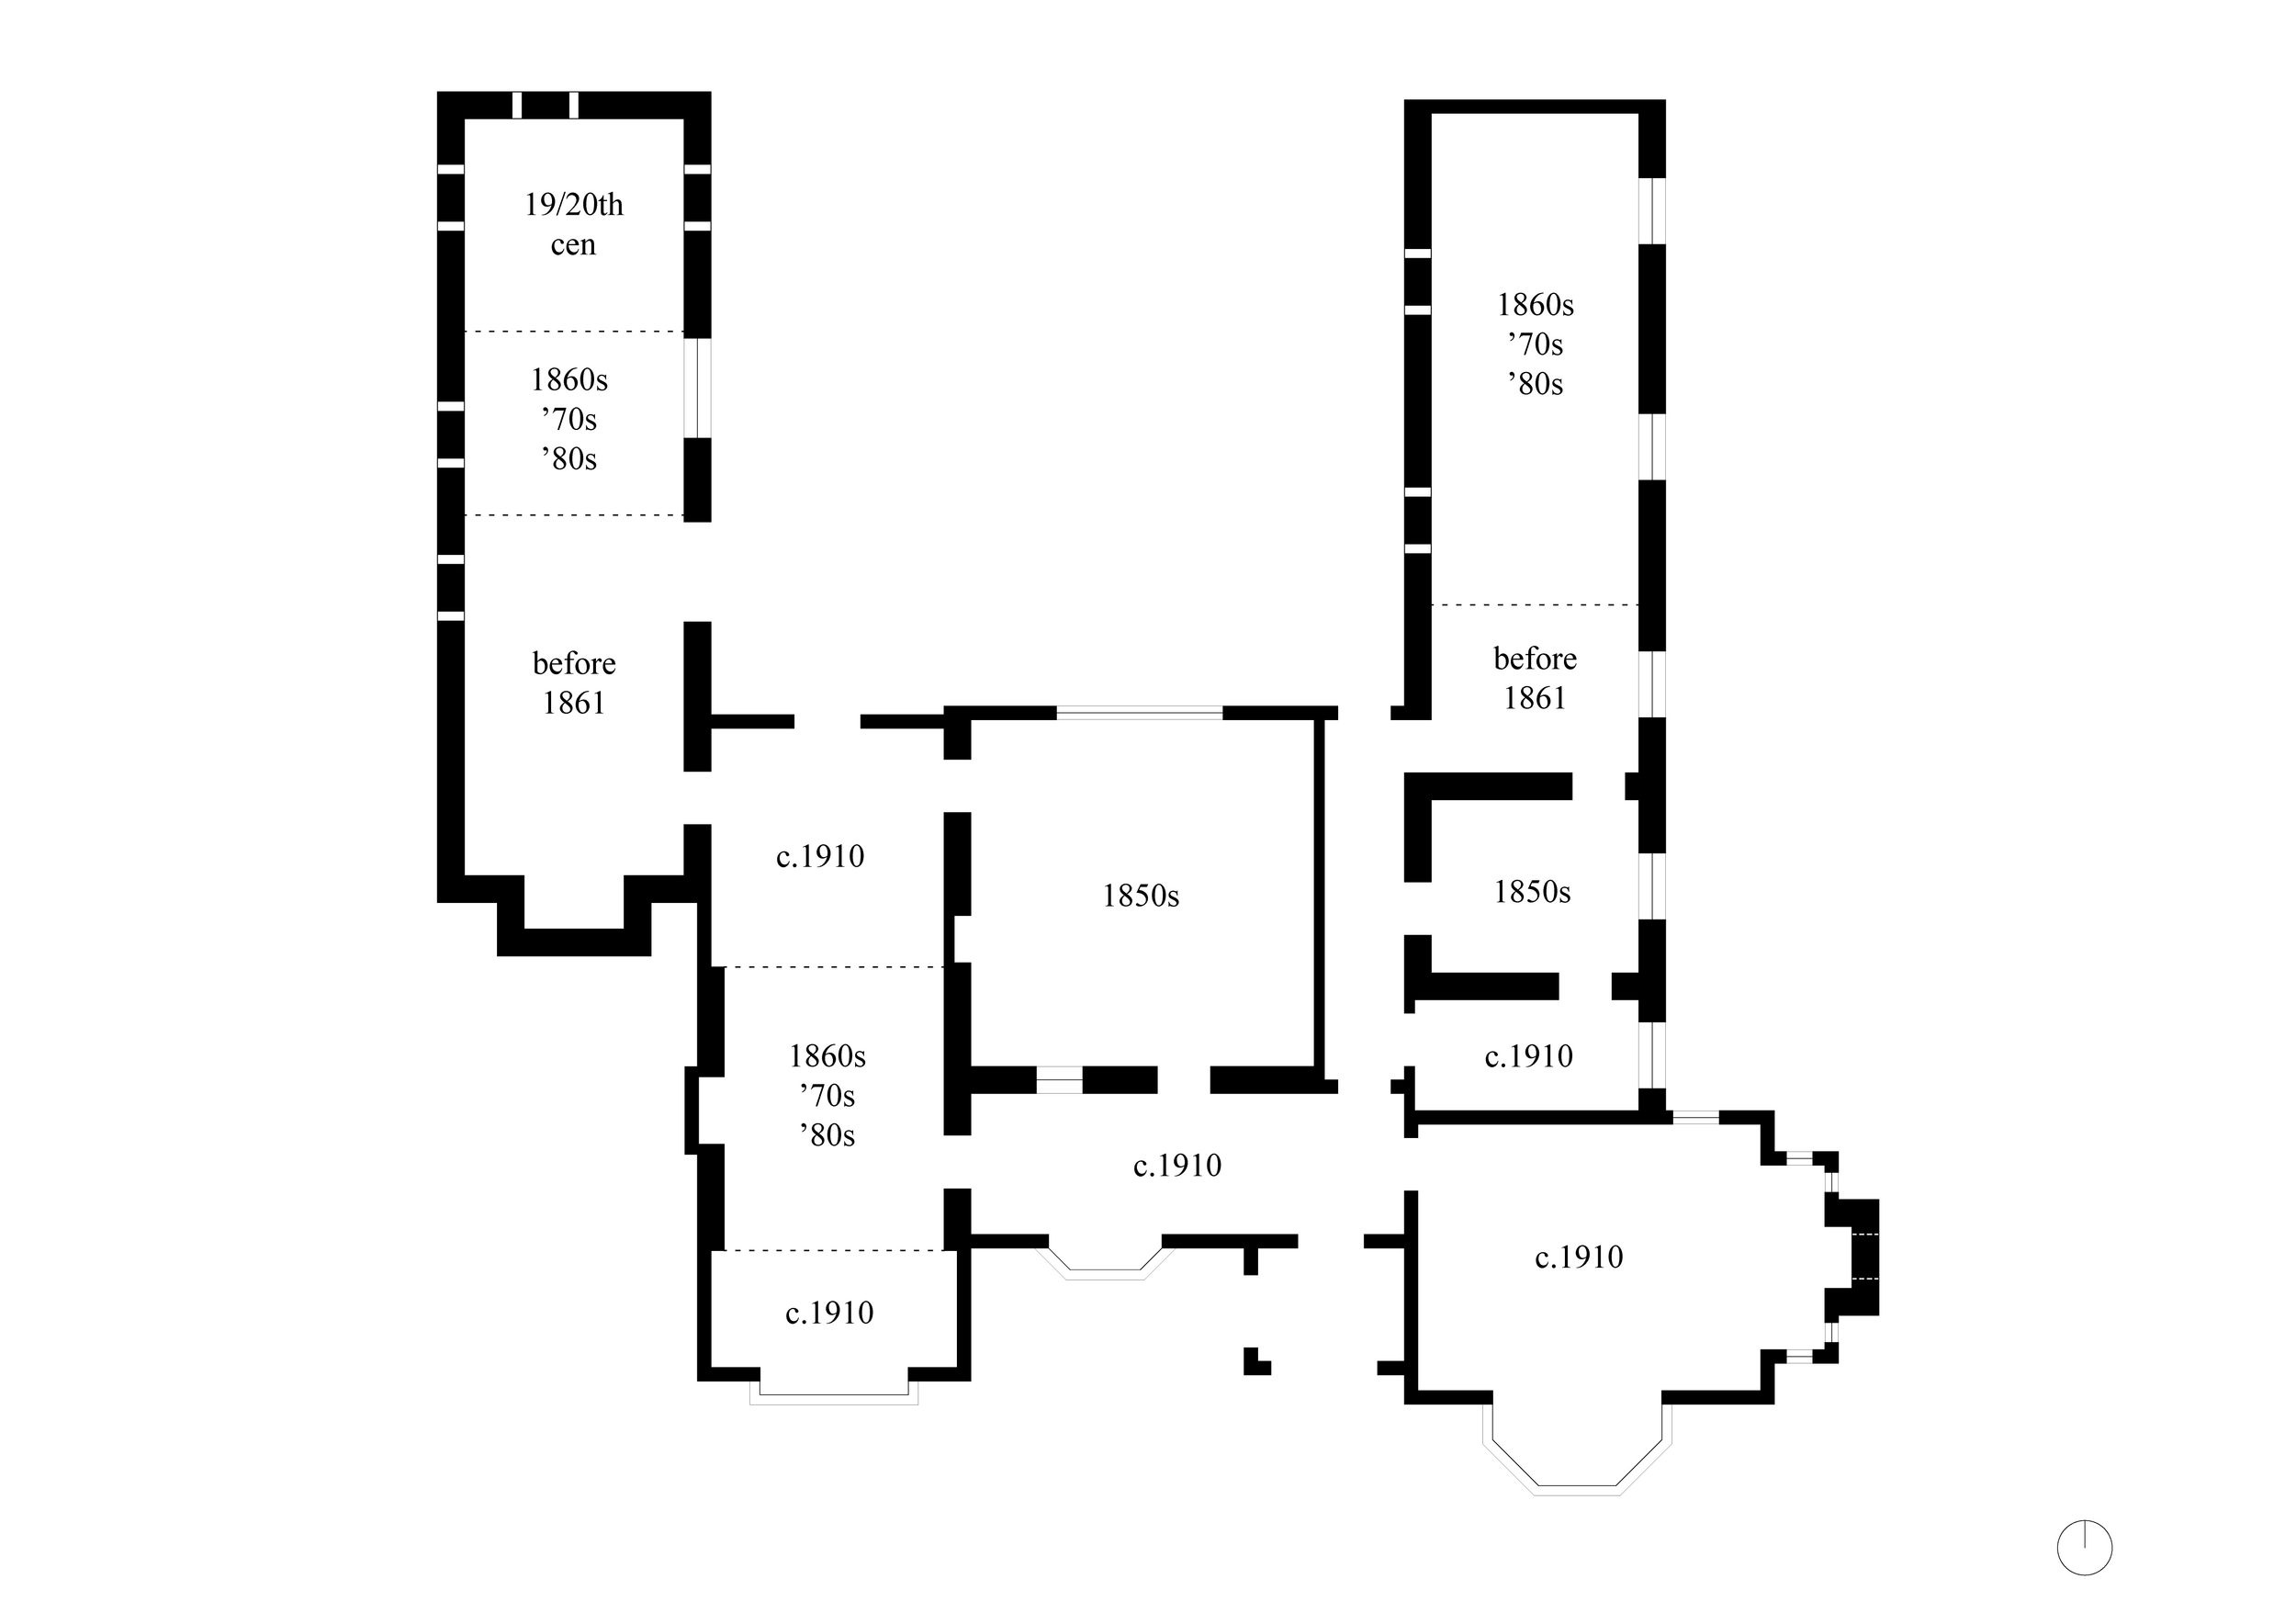 Chronological floorplan of the Altona Homestead, drawn by author after David Bick Conservation Report 1988, Altona Laverton Historical Society. White dotted lines denote the reinstated fireplace on the eastern elevation.